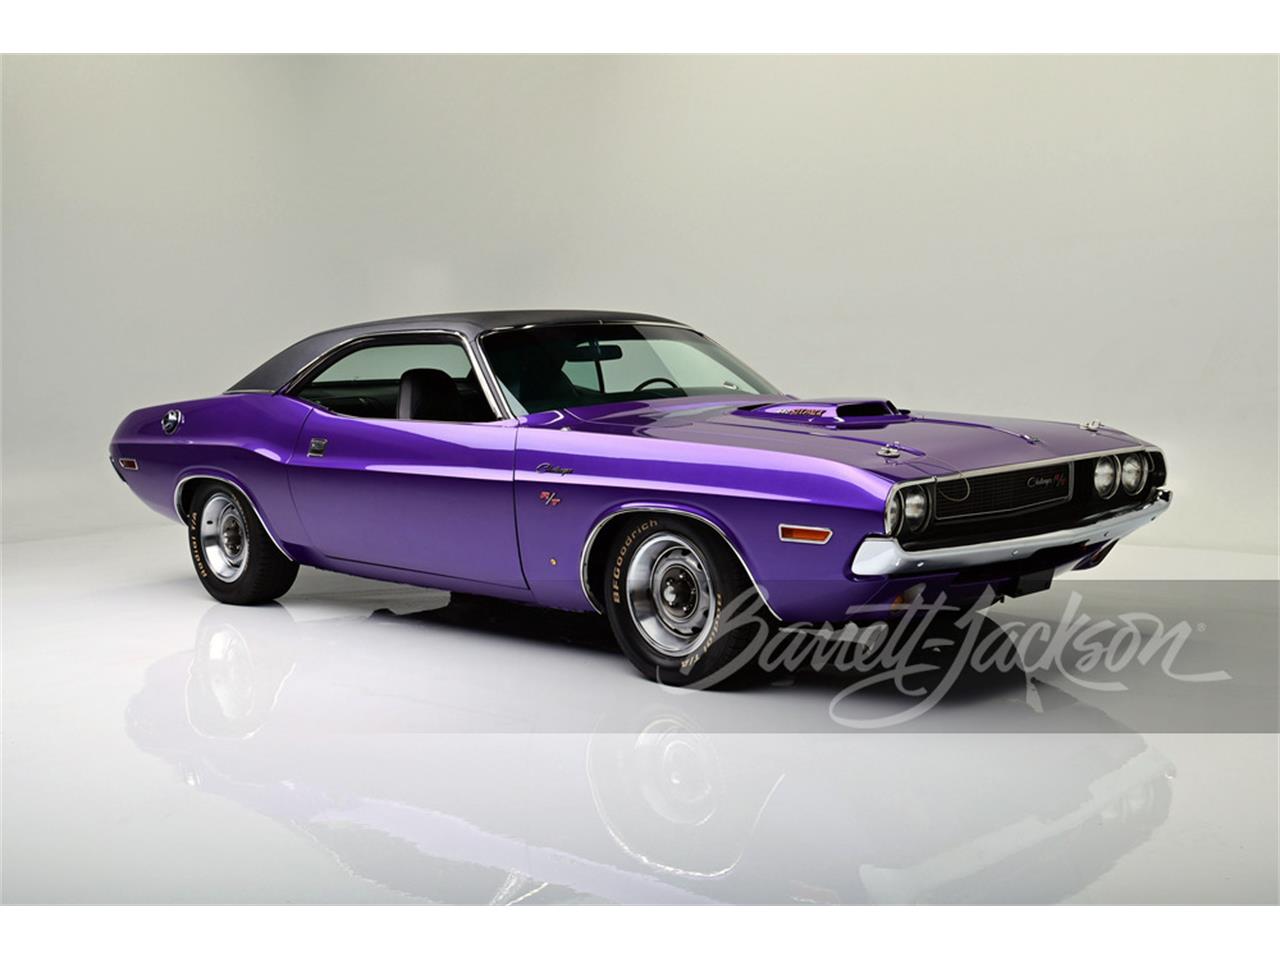 For Sale at Auction: 1970 Dodge Challenger R/T in Scottsdale, Arizona for sale in Scottsdale, AZ